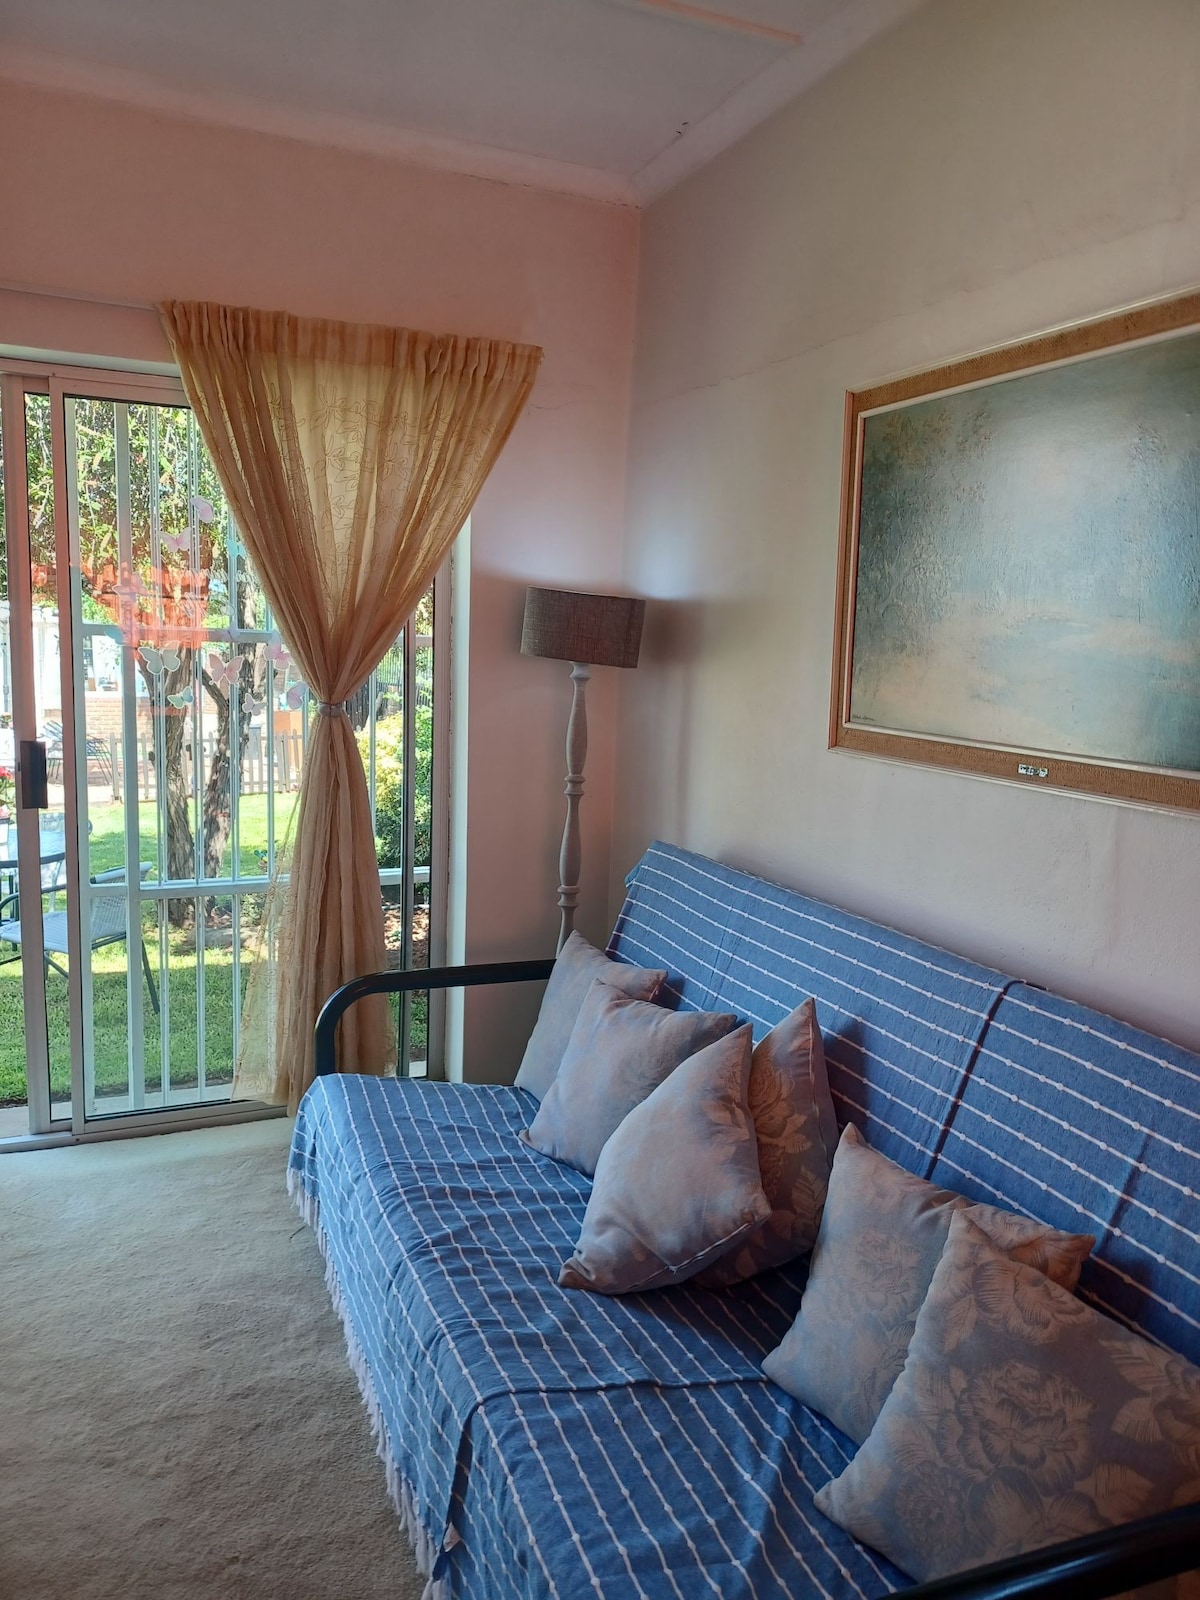 Adorable 1 bedroom flat fully equipped with a pool